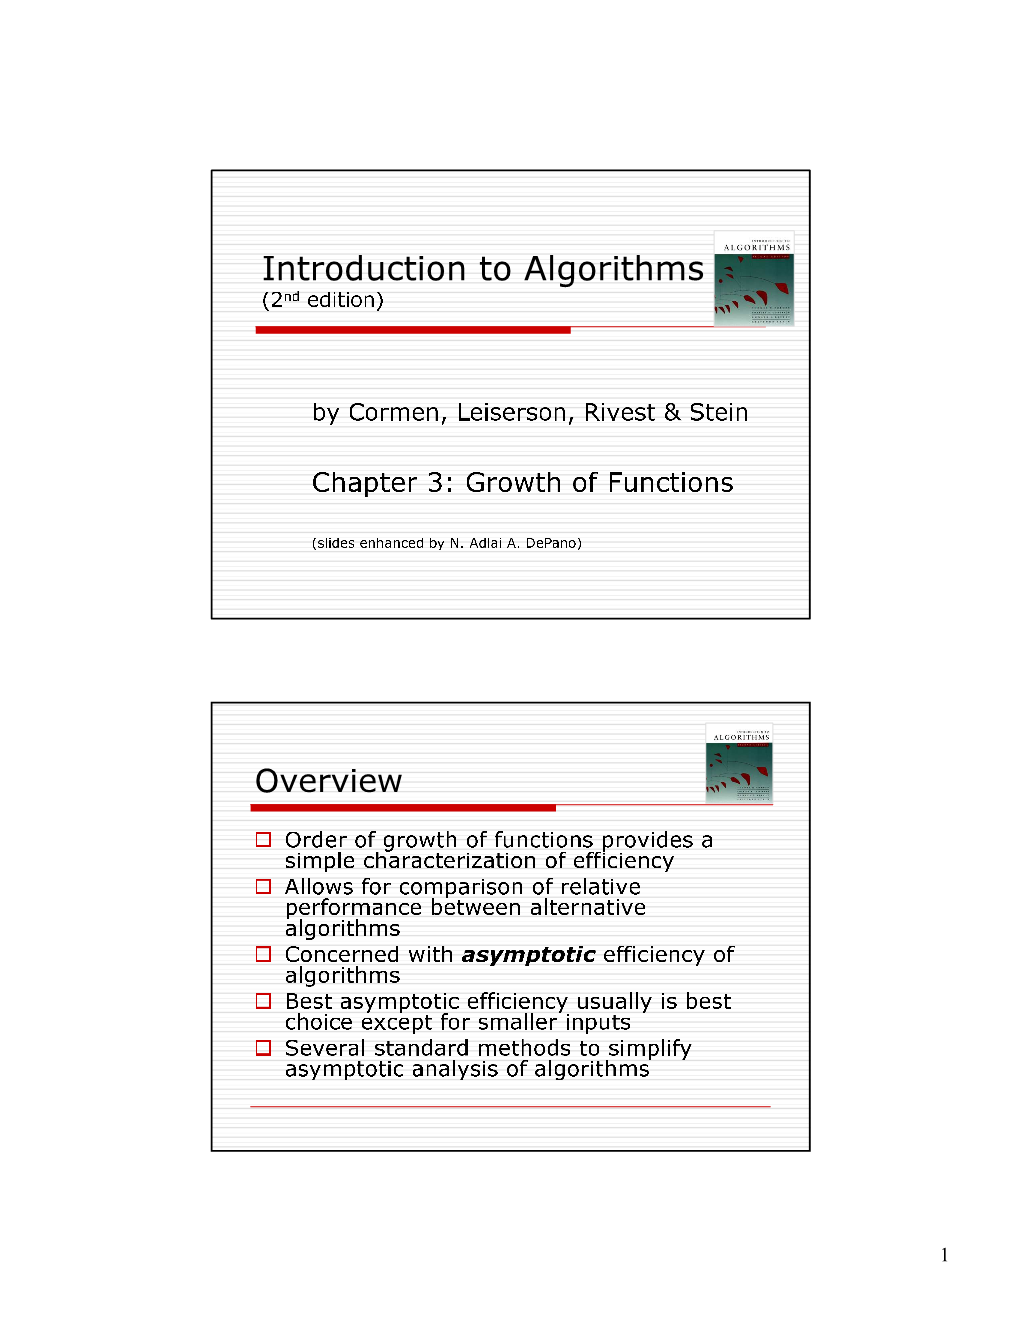 Introduction to Algorithms Chapter 3: Growth of Functions